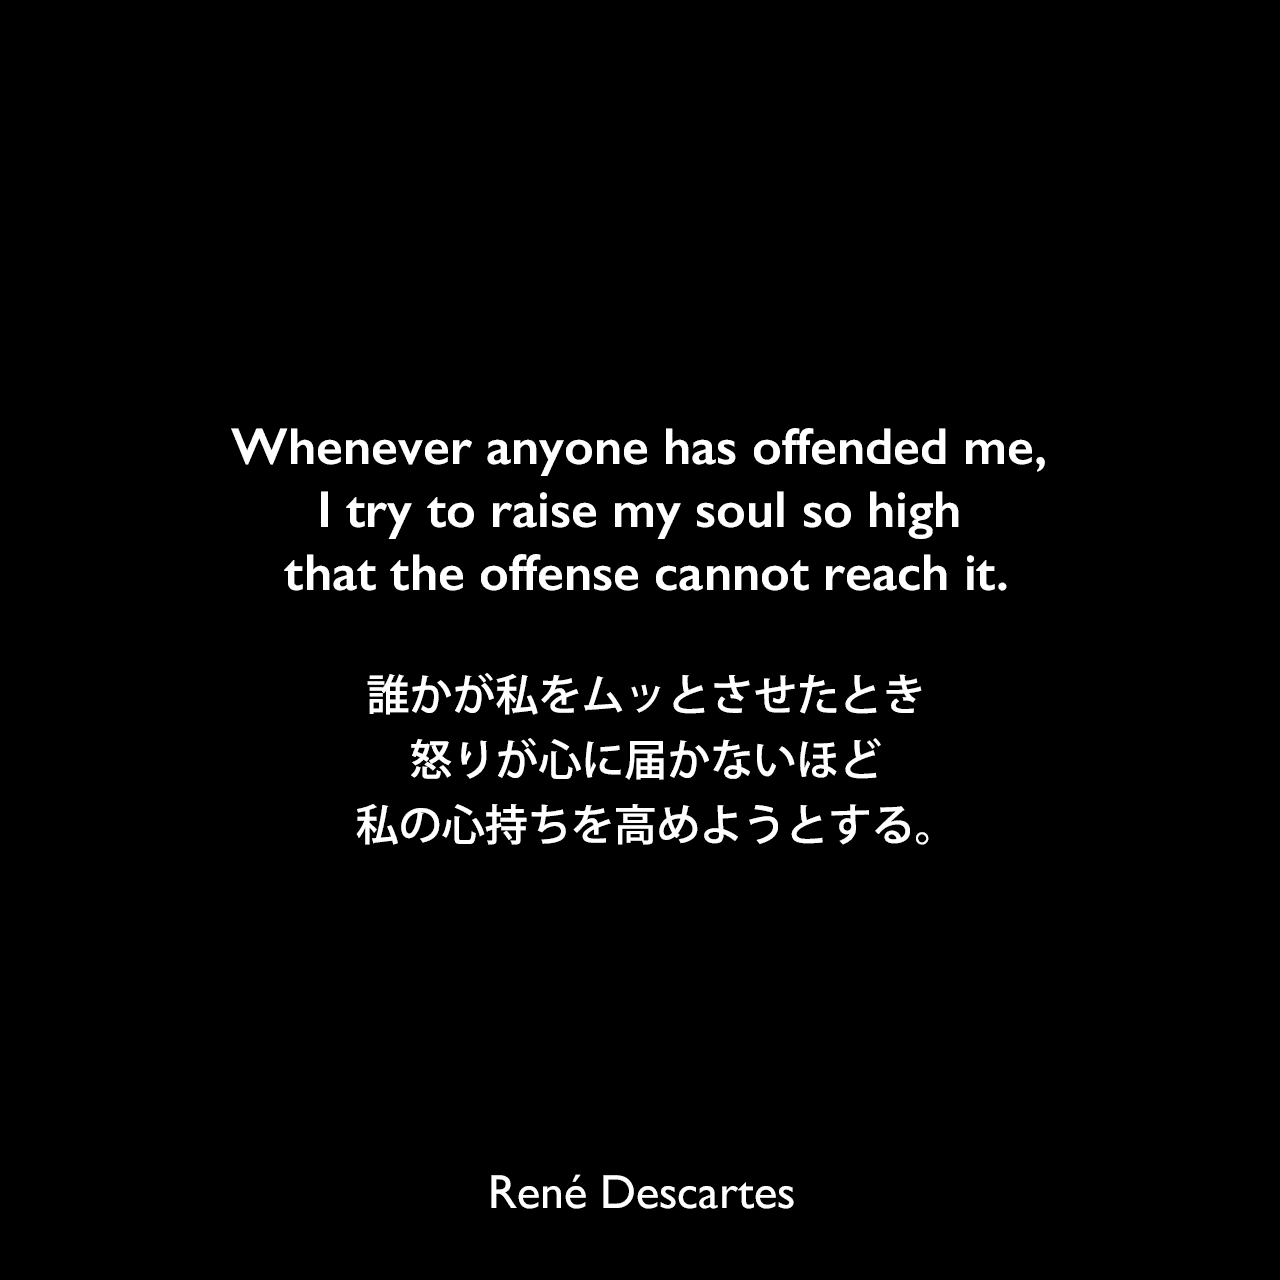 Whenever anyone has offended me, I try to raise my soul so high that the offense cannot reach it.誰かが私をムッとさせたとき、怒りが心に届かないほど私の心持ちを高めようとする。